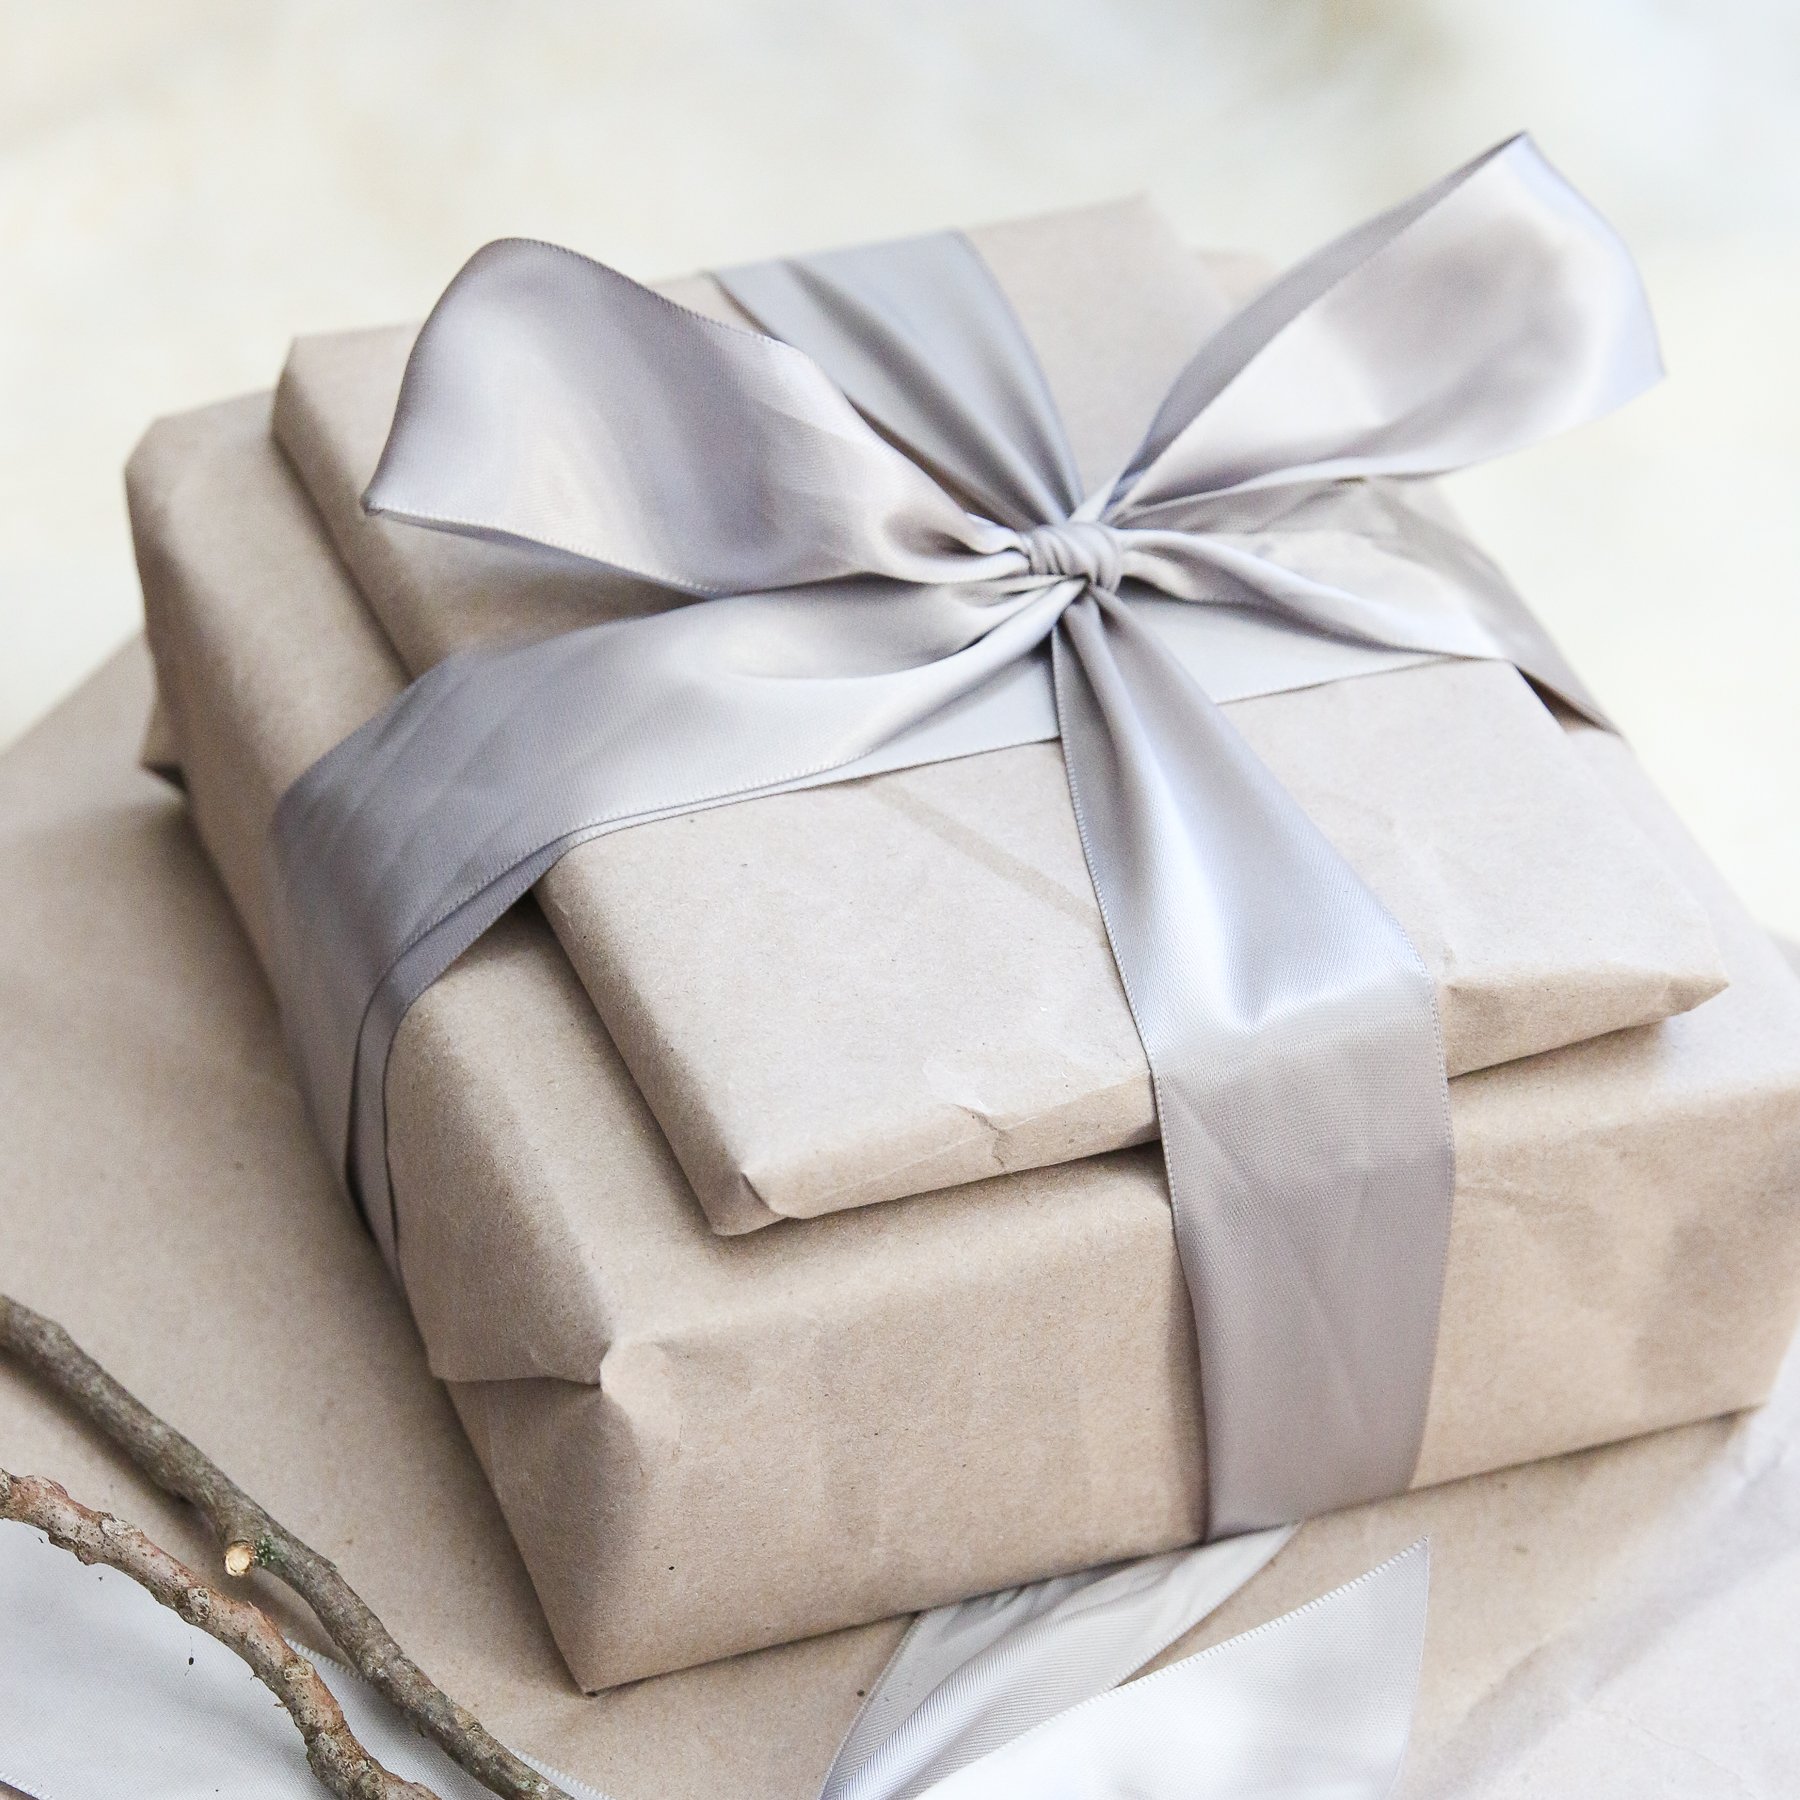 Kids’ Gift Ideas That Won’t Be Impacted By Supply Chain Issues